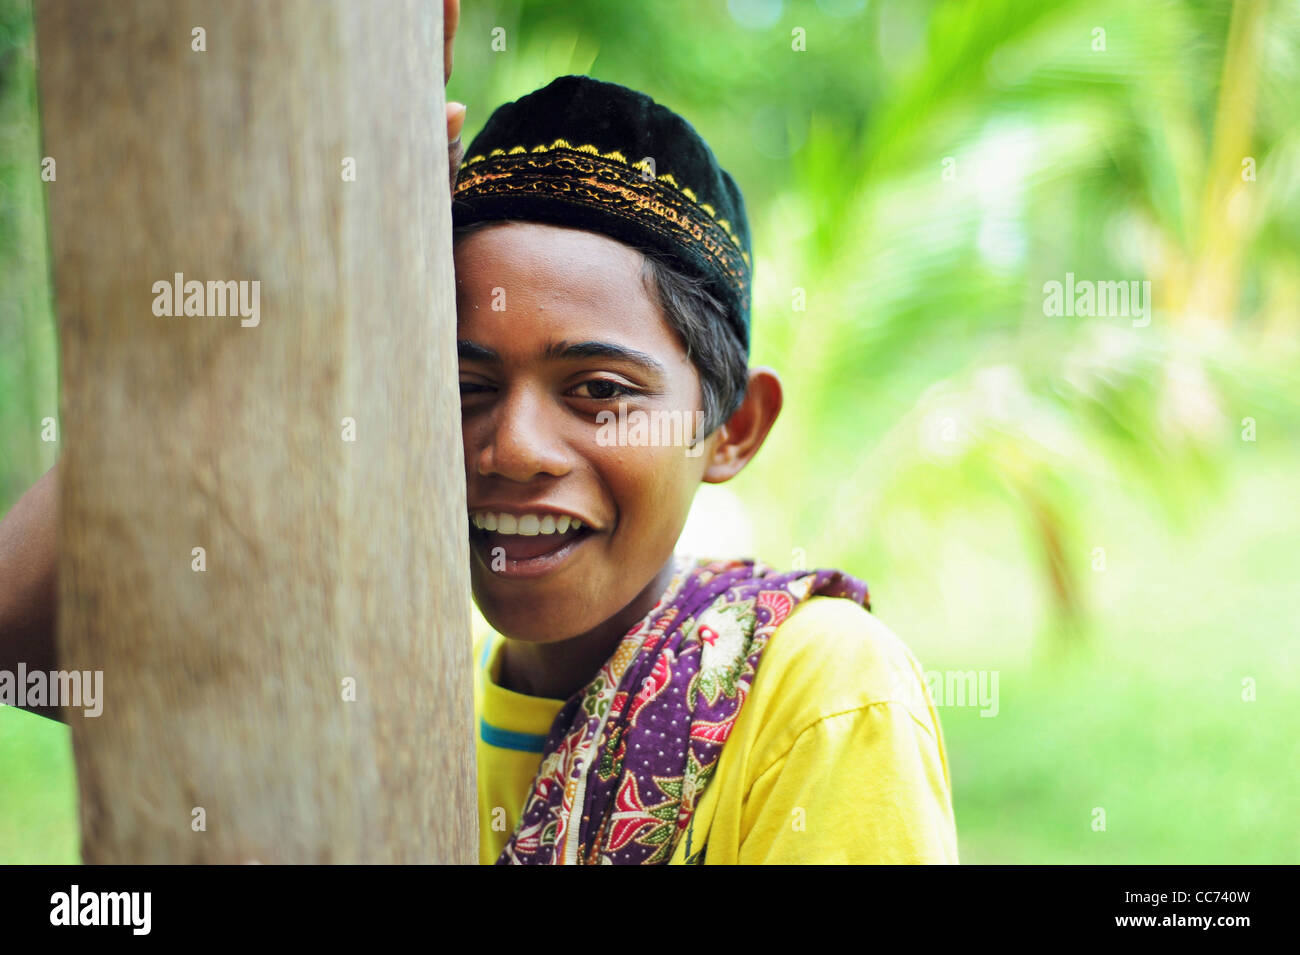 Indonesia, Sumatra, Banda Aceh, young boy in traditional dress smiling and hiding behind tree Stock Photo